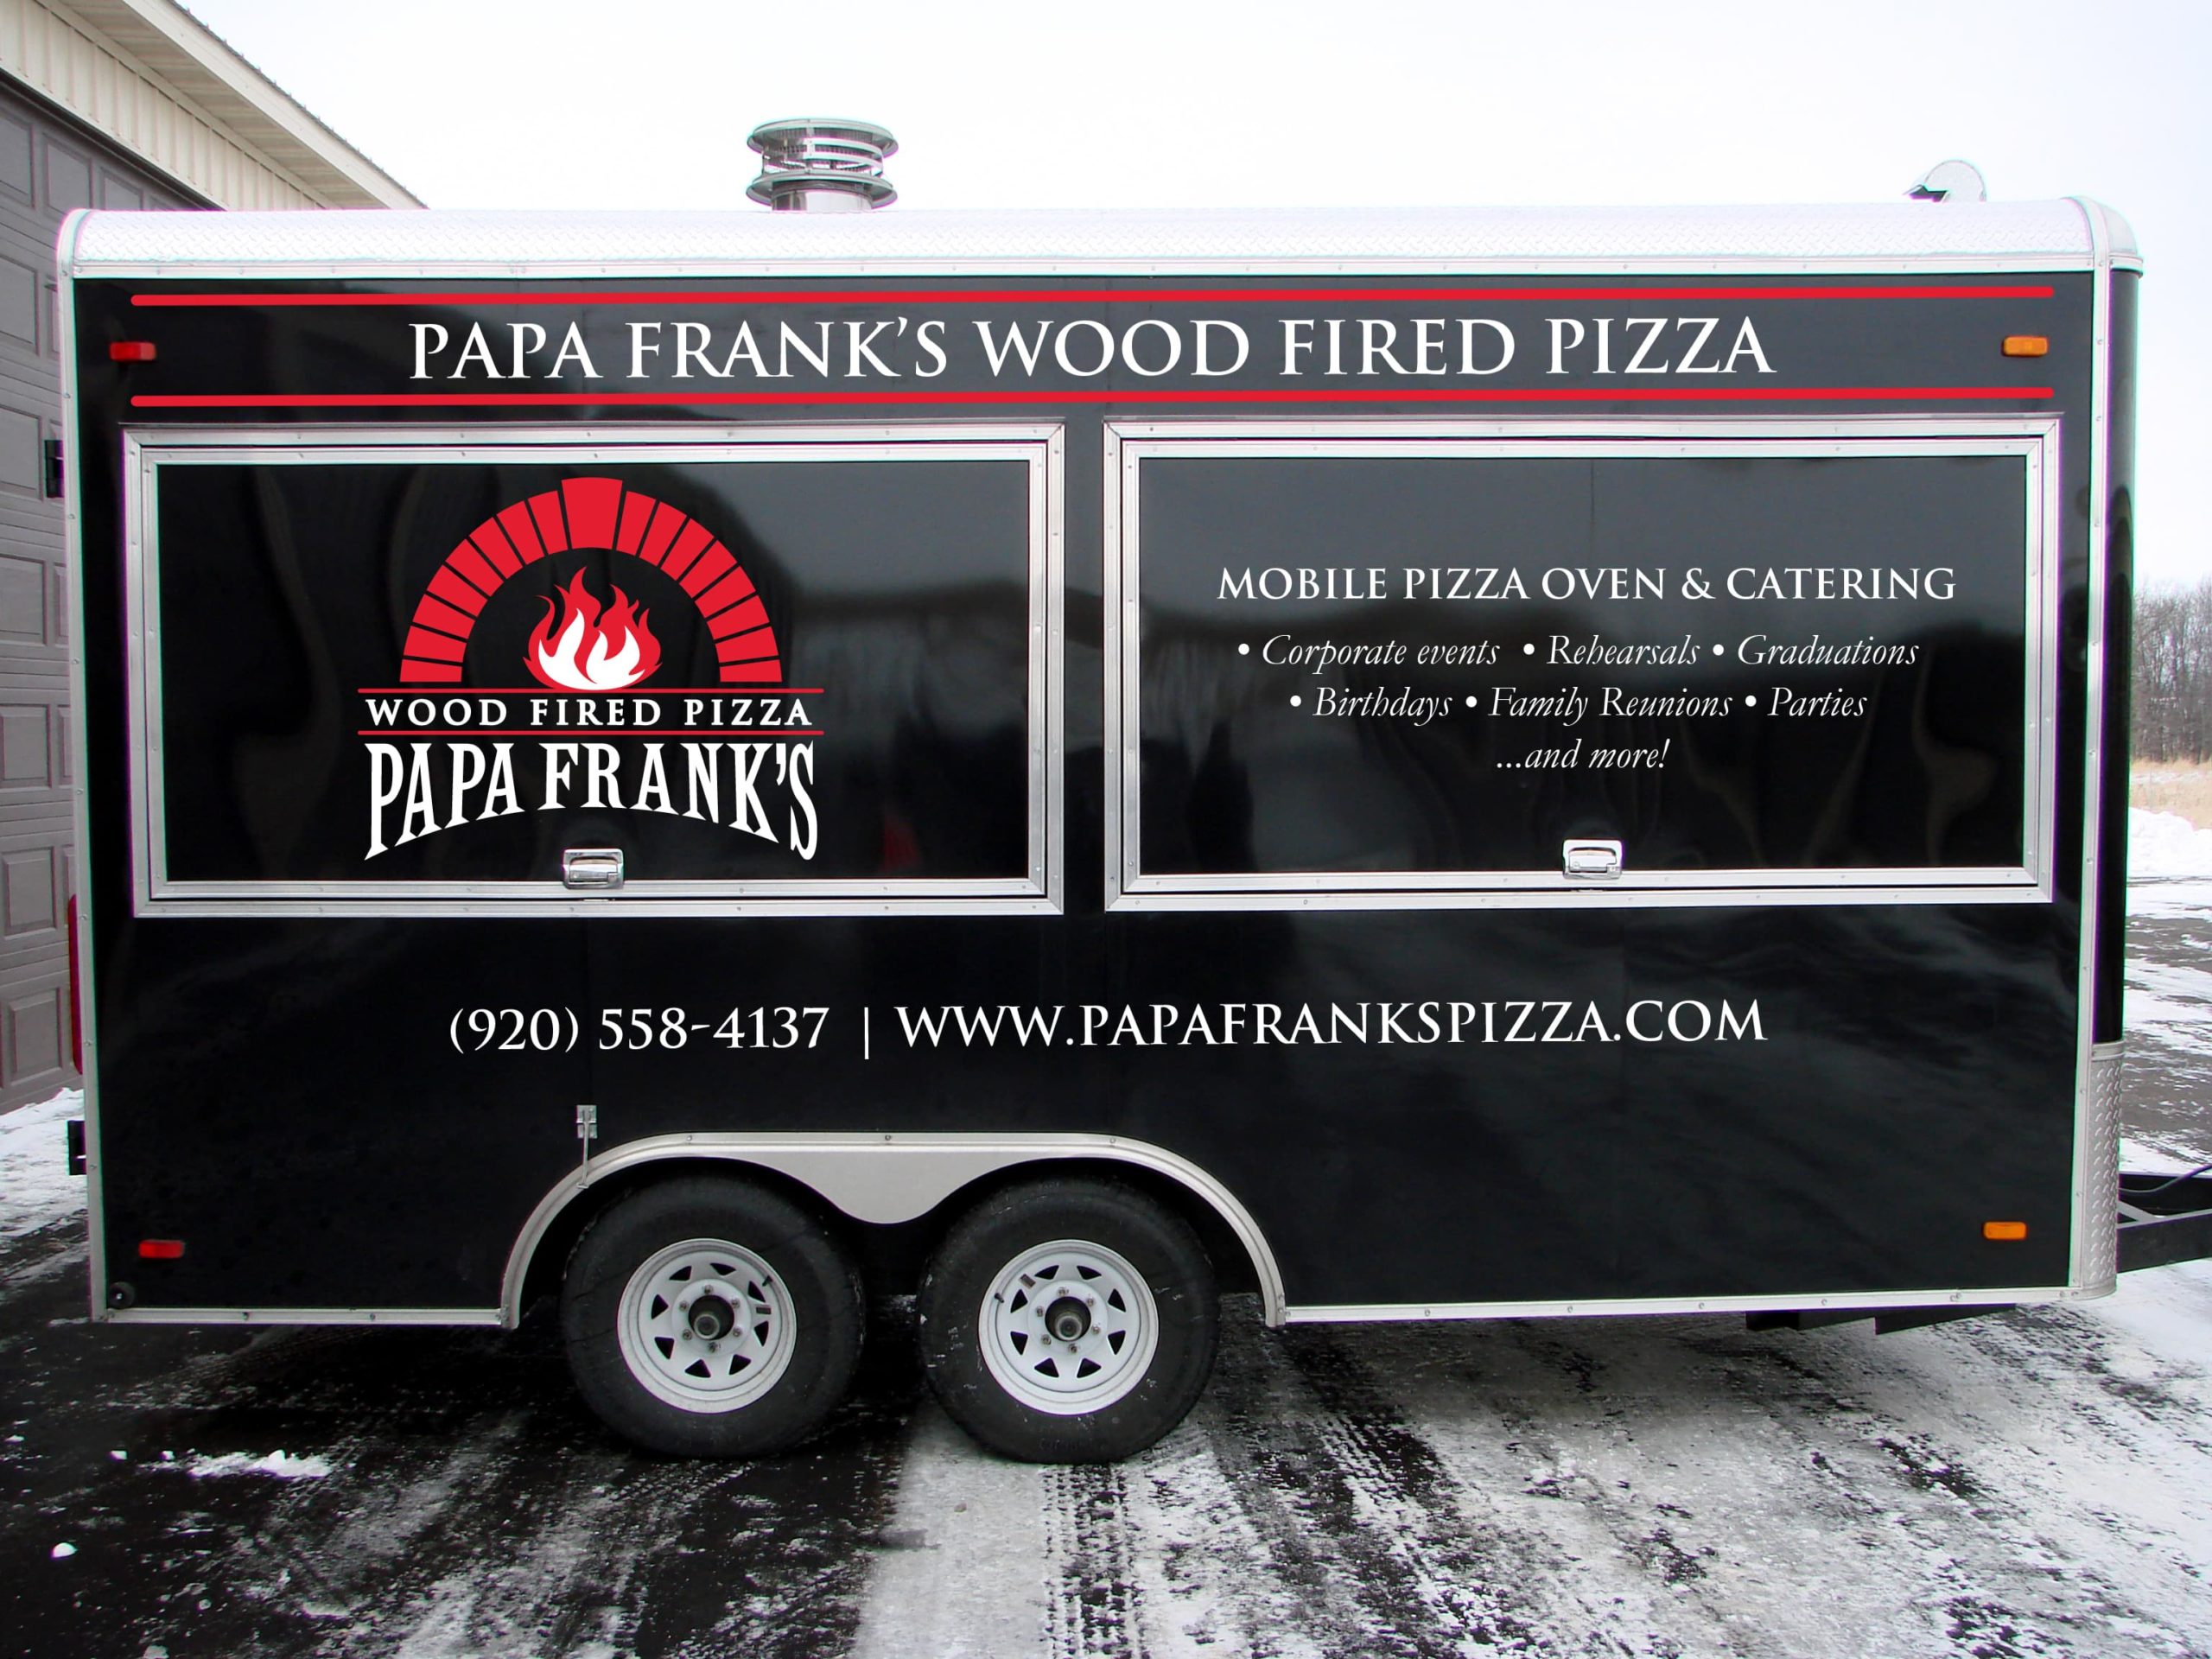 Papa Frank's Mobile Pizza Oven